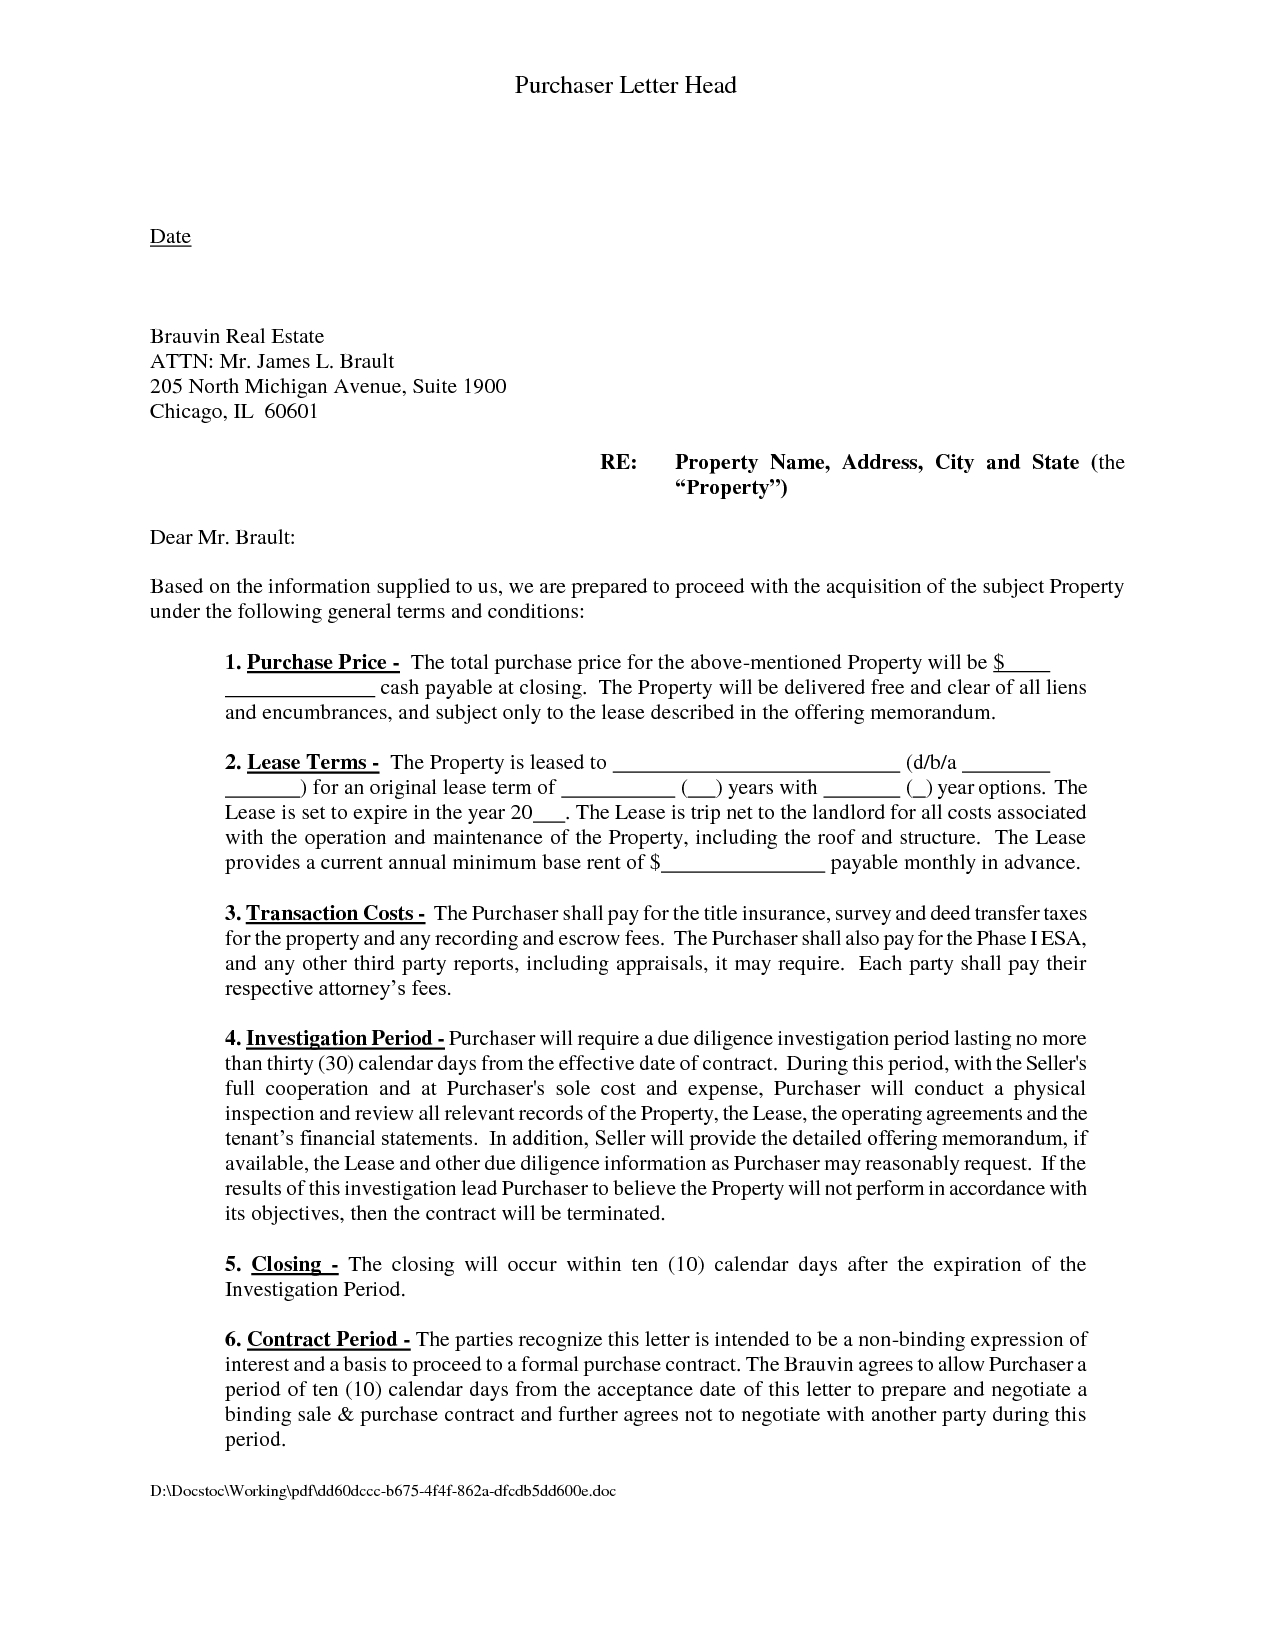 Commercial Real Estate Lease Letter Of Intent Template - Mercial Letter Intent Template to Lease Space Real Estate